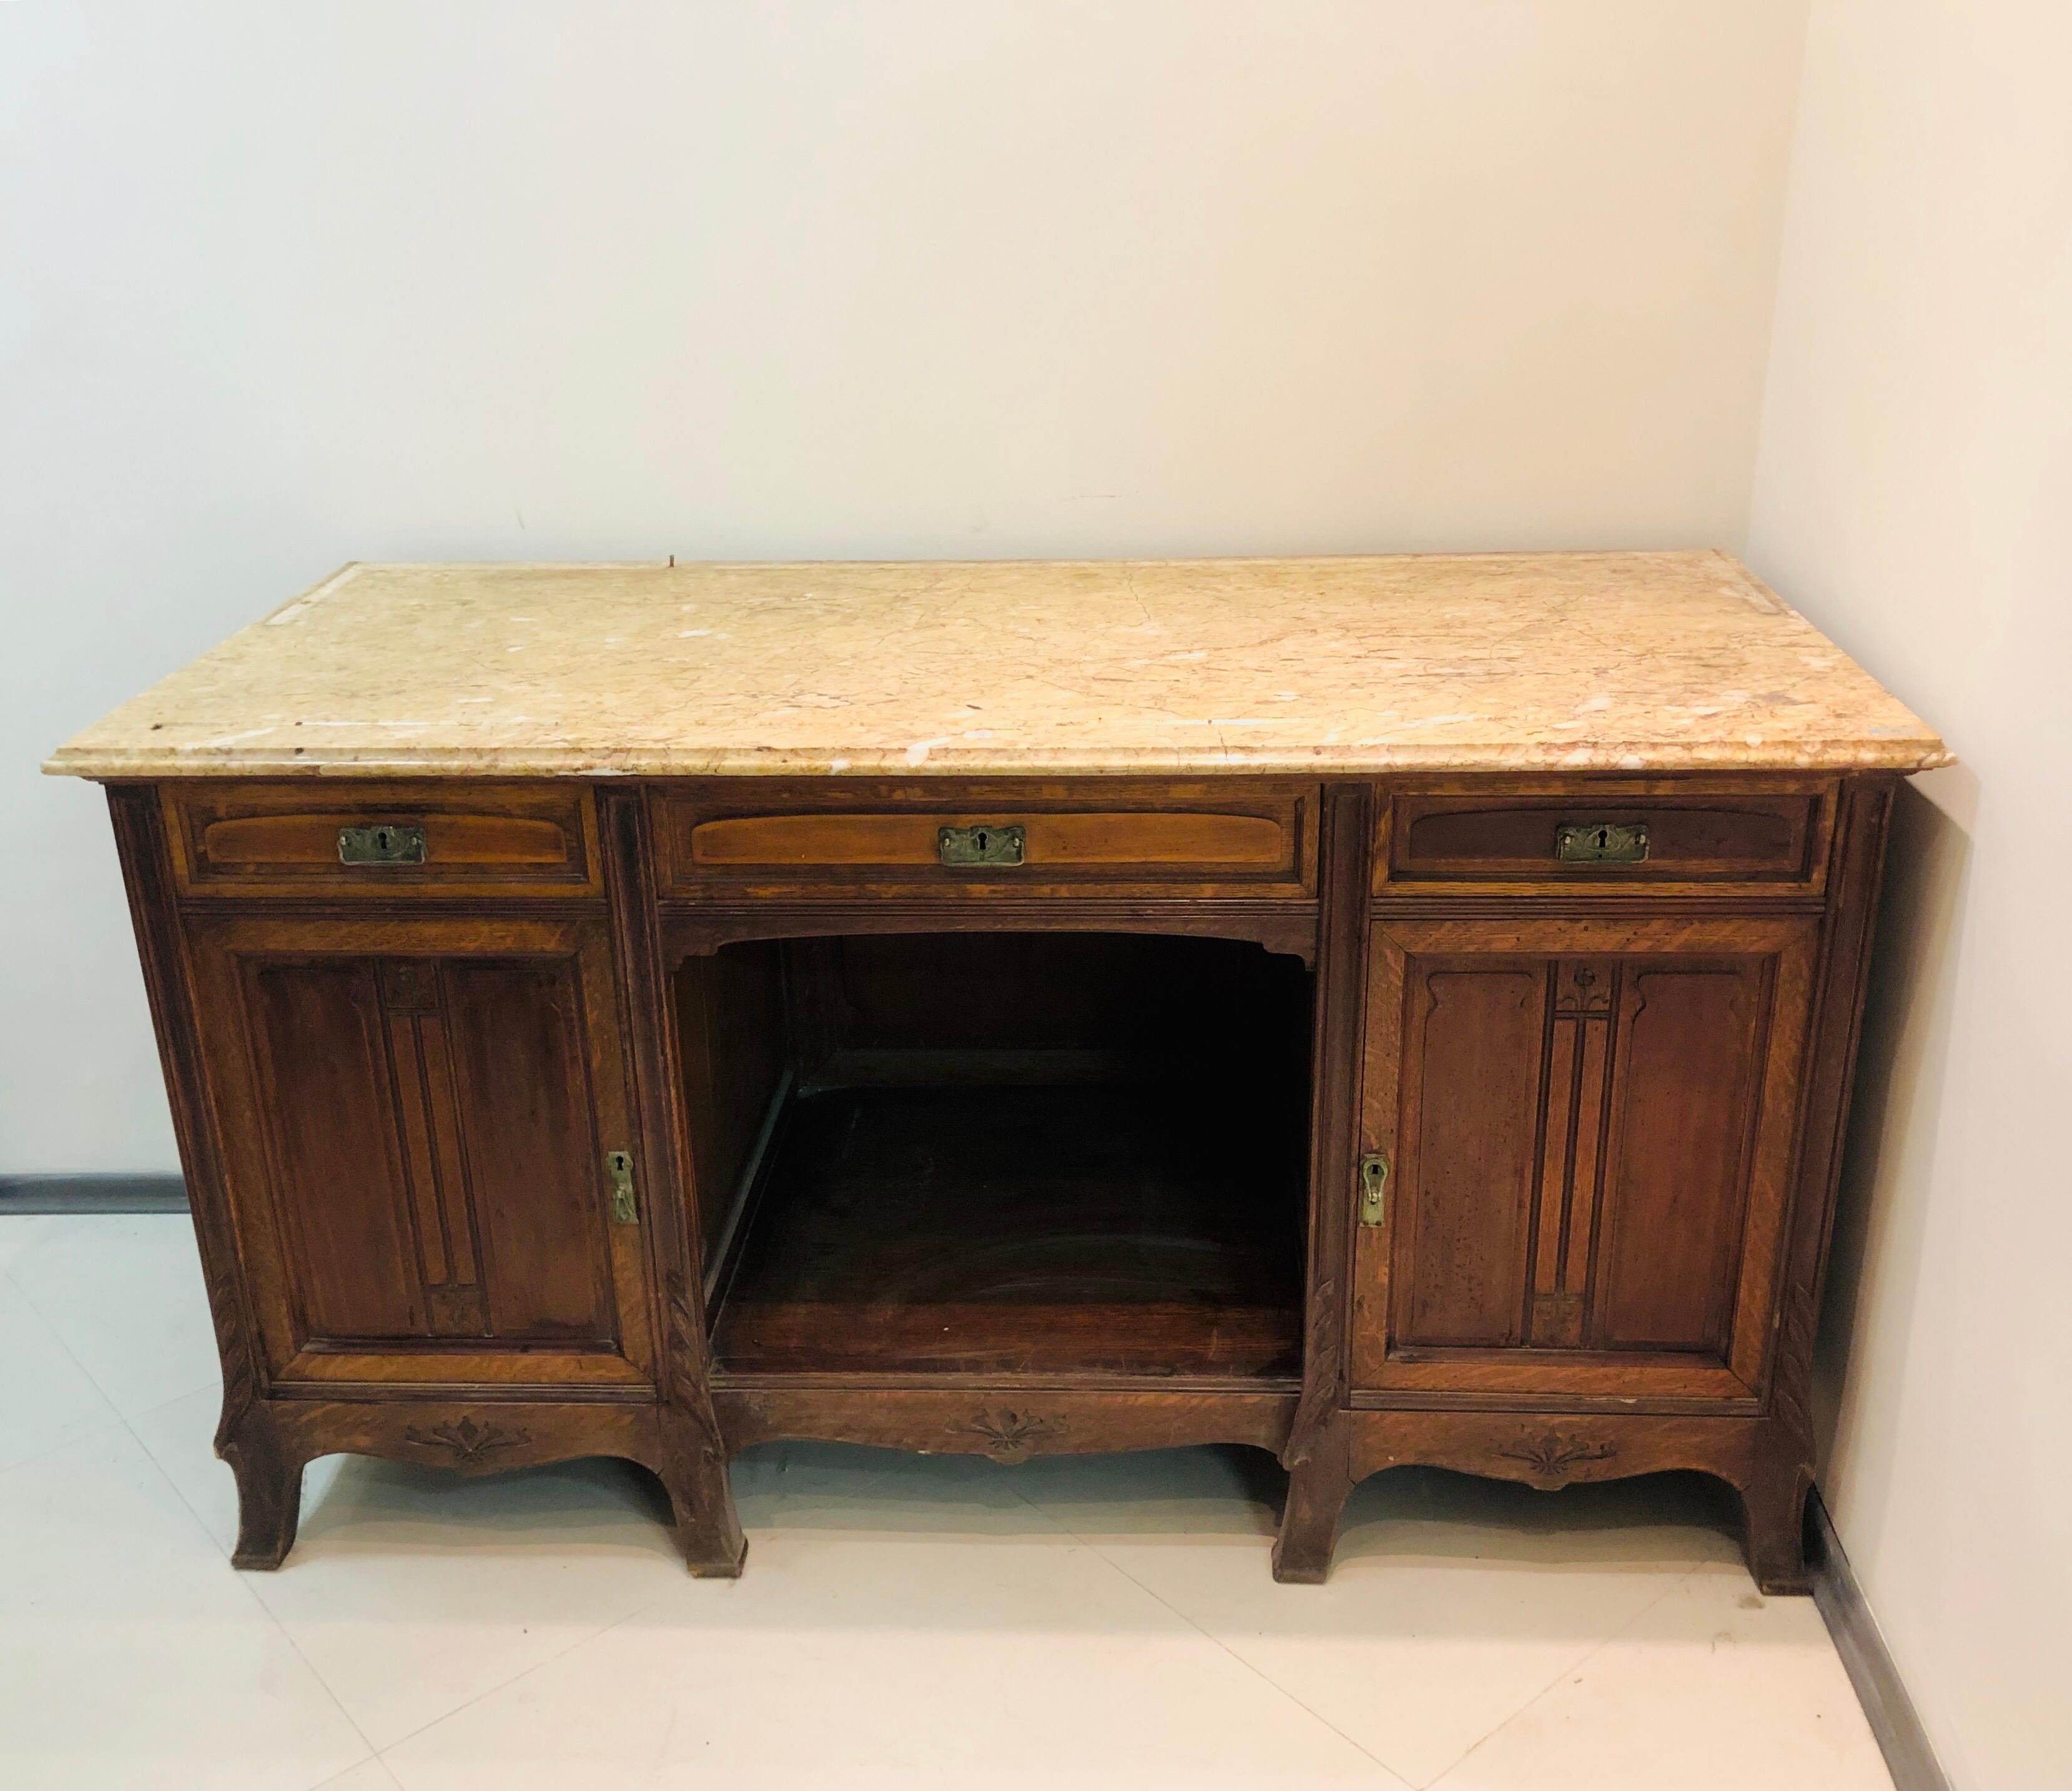 Large mahogany buffet Maison Koenig Liège made in 1895. There is light beige marble top, three drawers and two front doors with original key.
Could be used as a writing desk or as a center interior piece in a large bathroom with a sink on top of